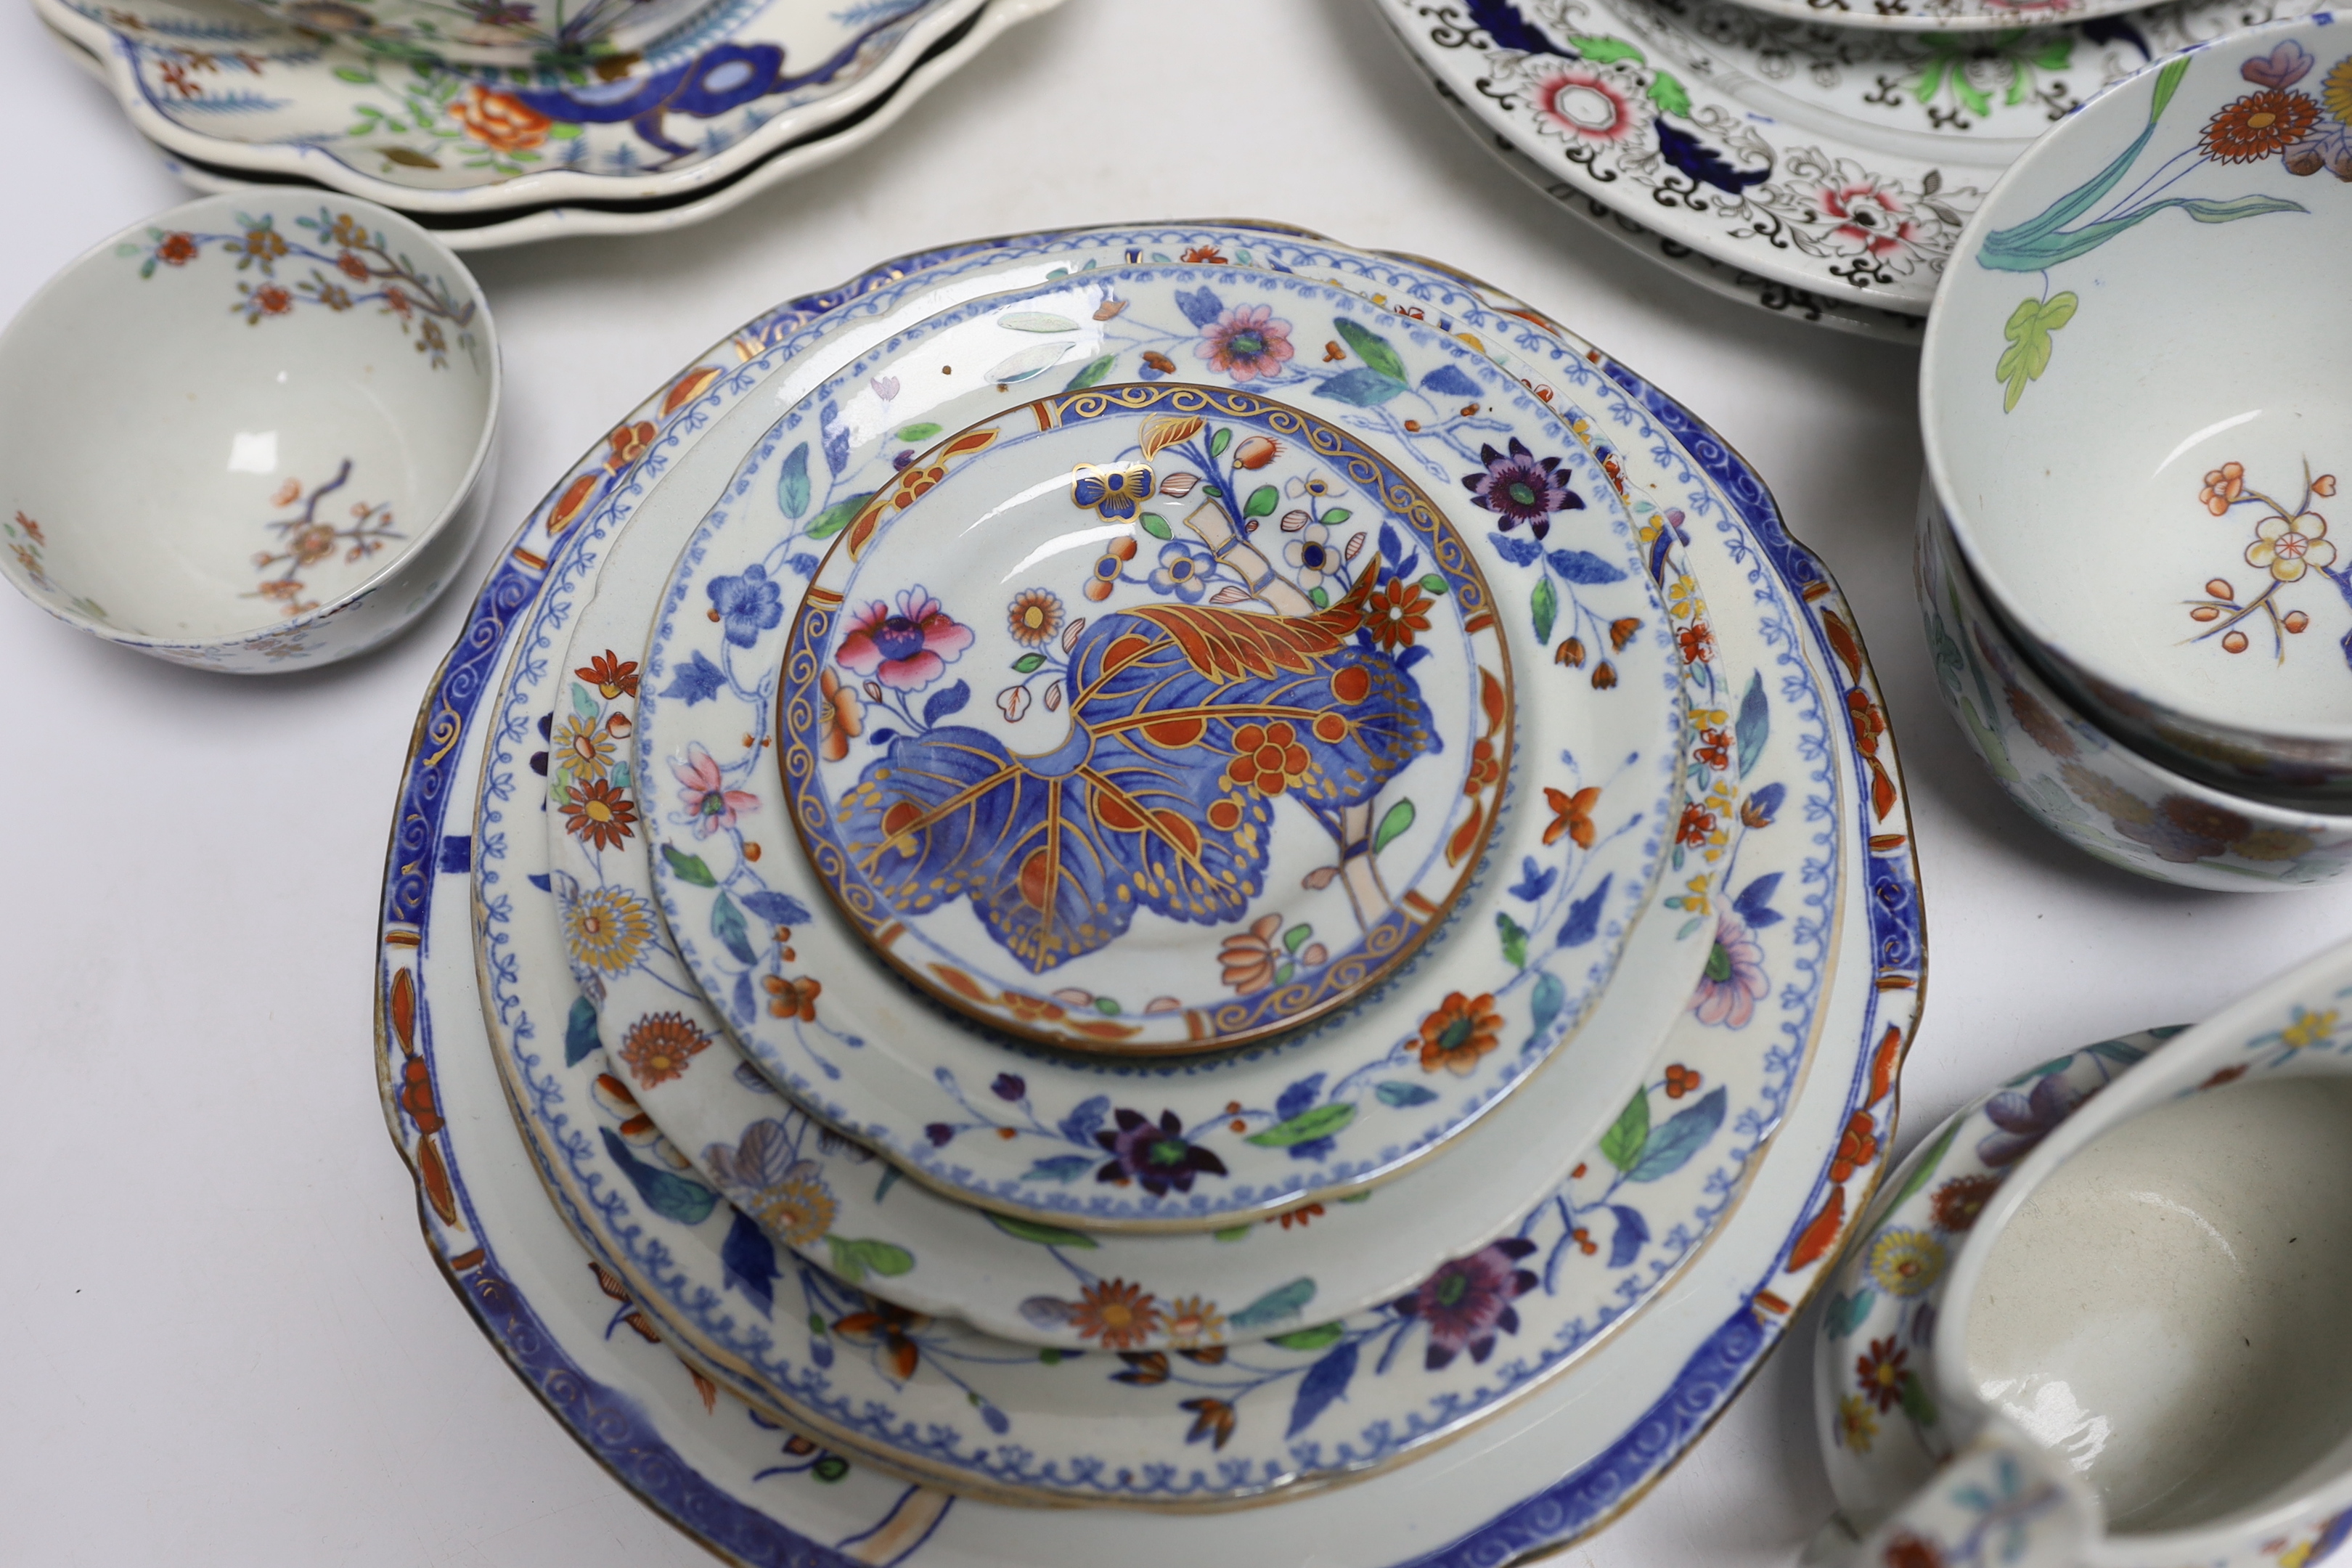 A collection of Spode Ironstone and pottery blue tea and dinnerware, including a pair of oval boat shaped sauce tureens and covers and a pair of shell shaped dessert dishes